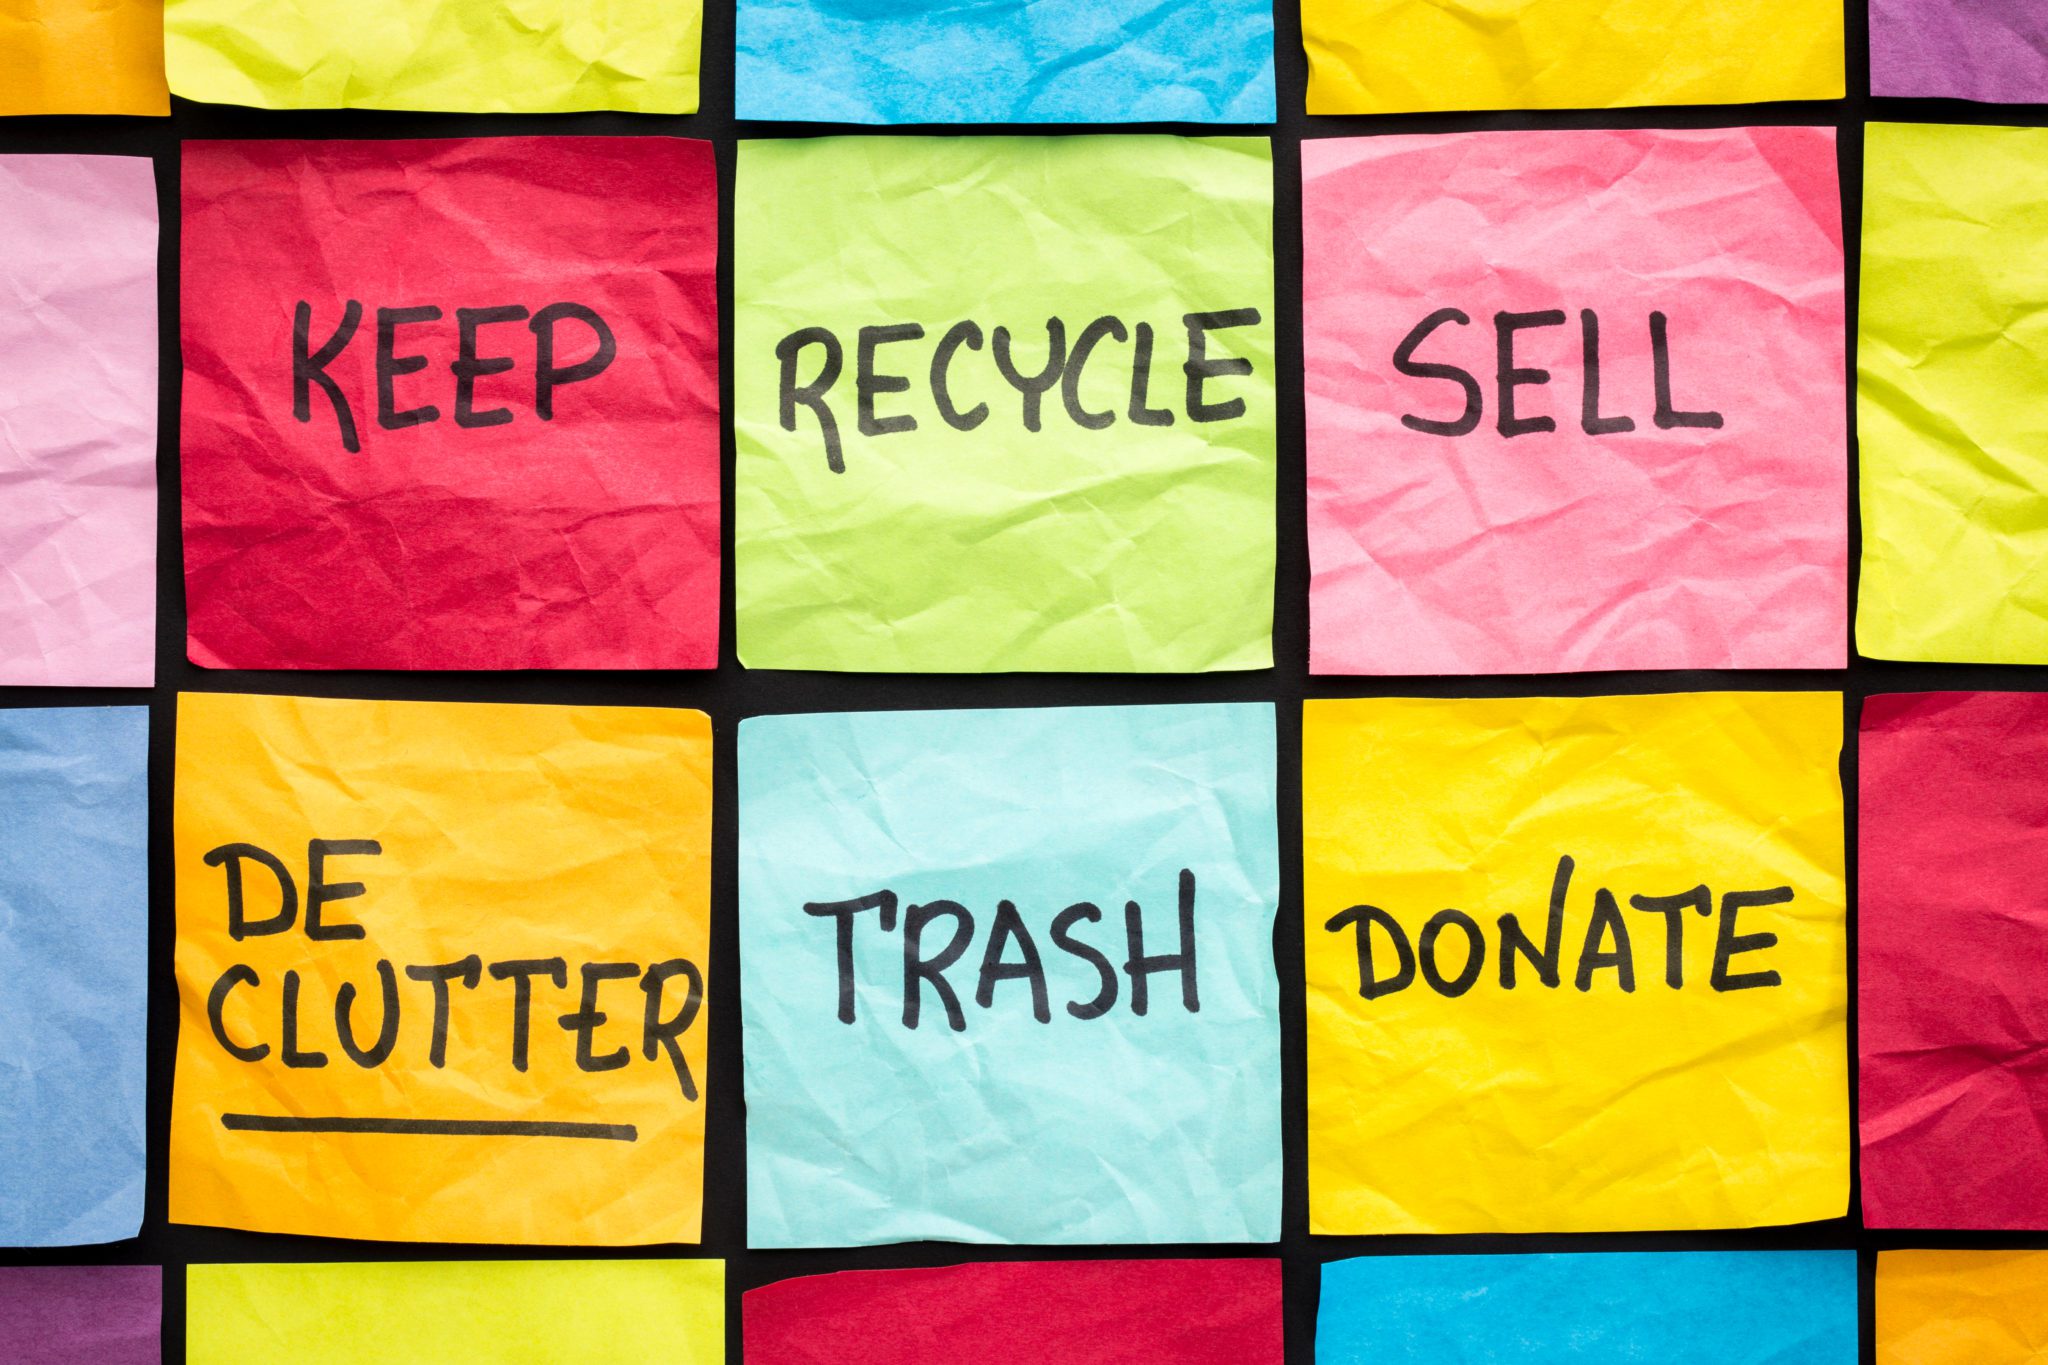 Declutter Your Closet and Donate to Those in Need